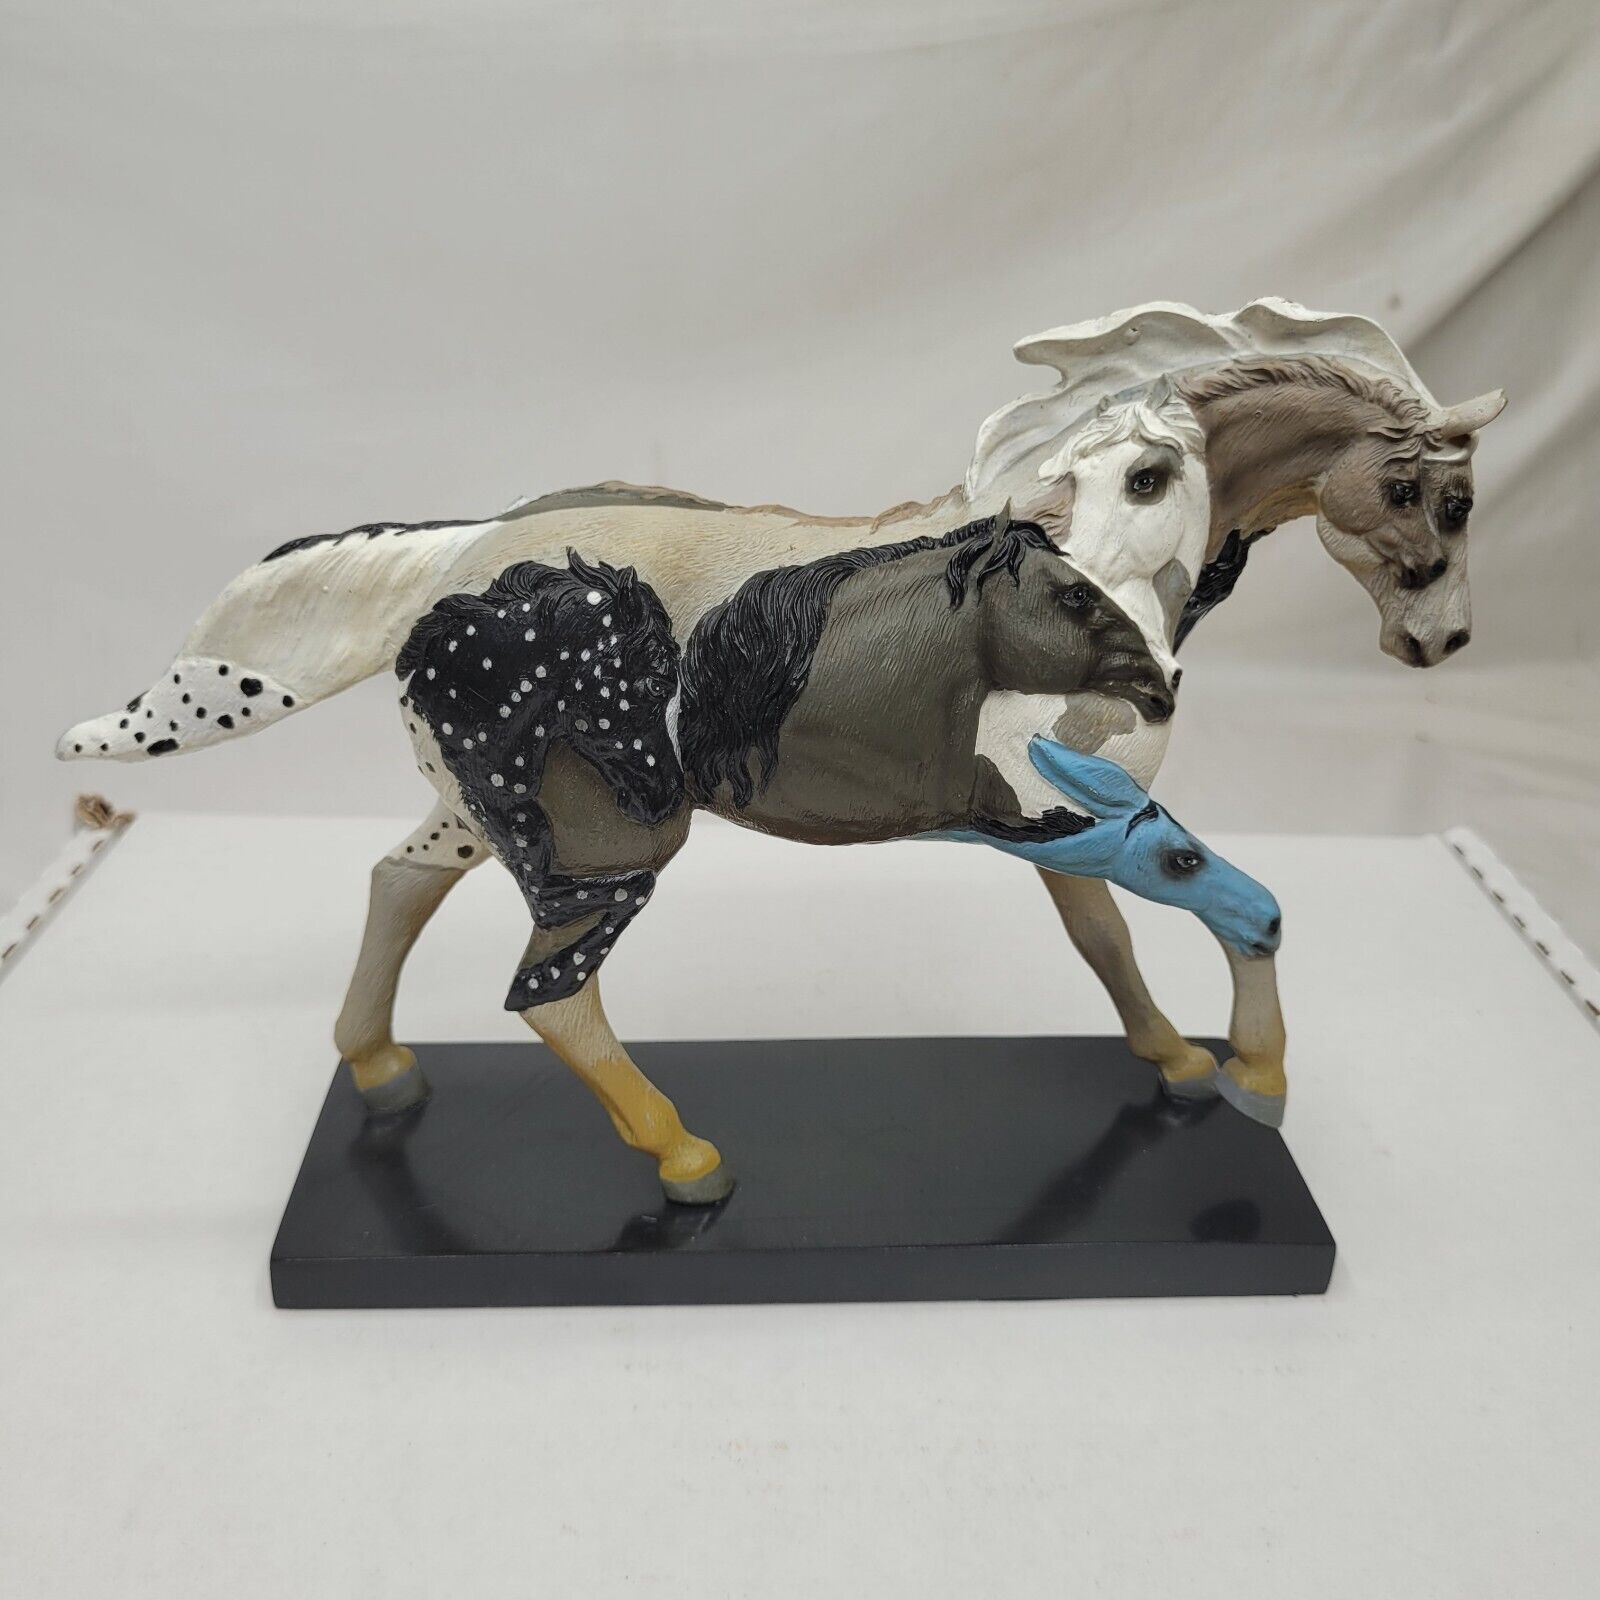 2006 Trail of Painted Ponies Year of the Horse Figurine Statue 12223 Lori Musil